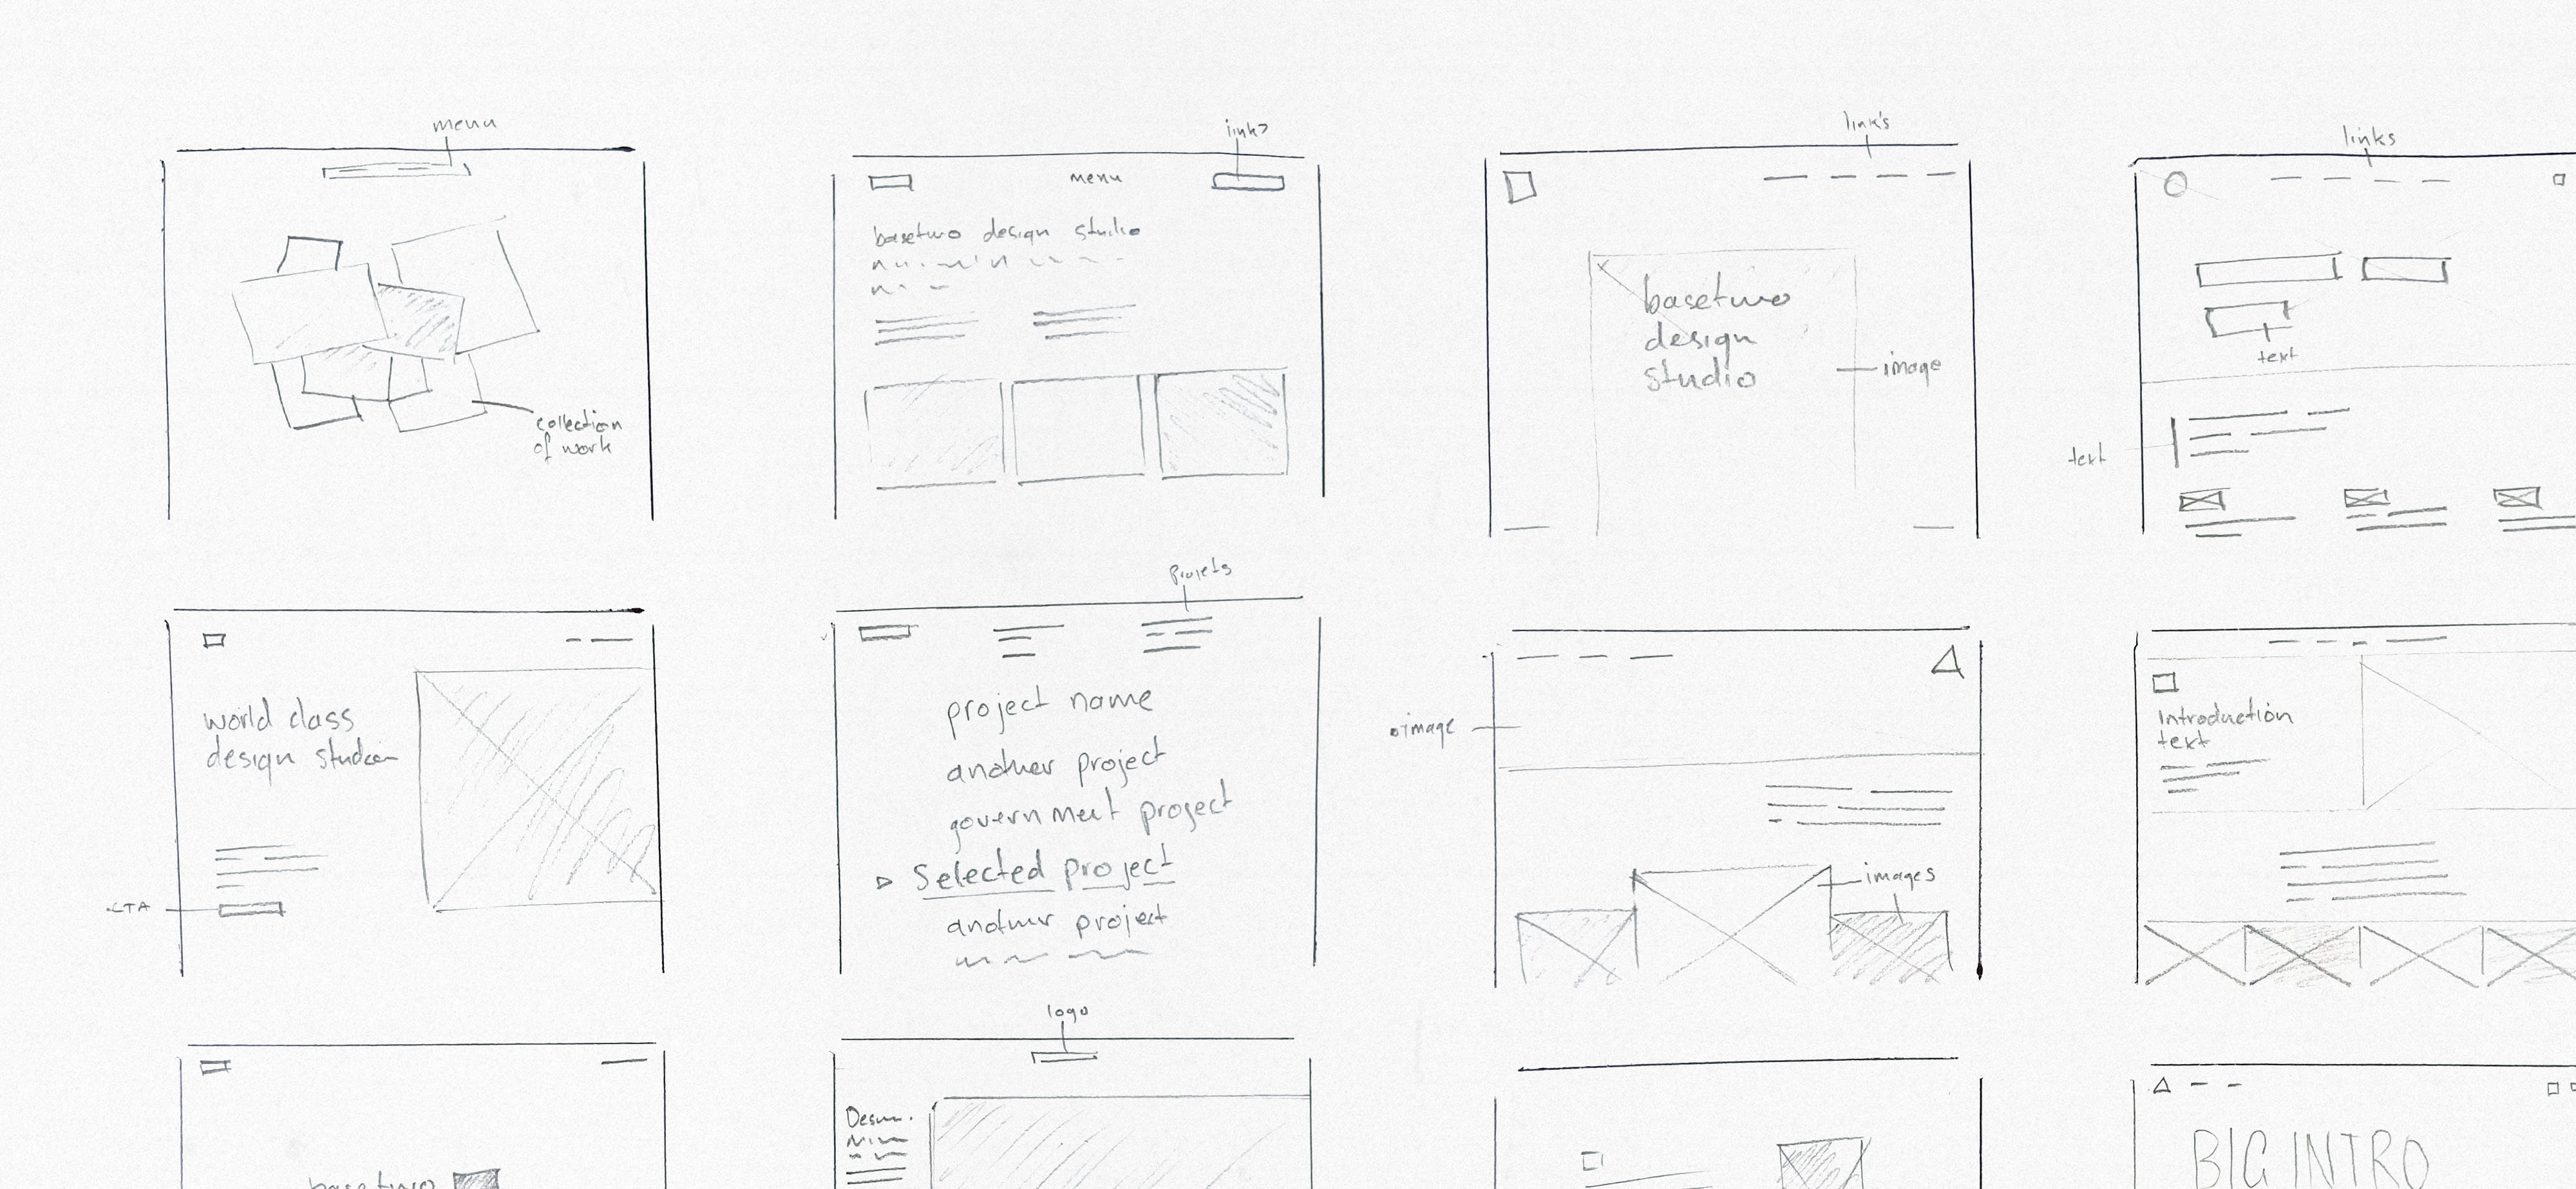 Exploring website possibilities with sketches and wireframes.